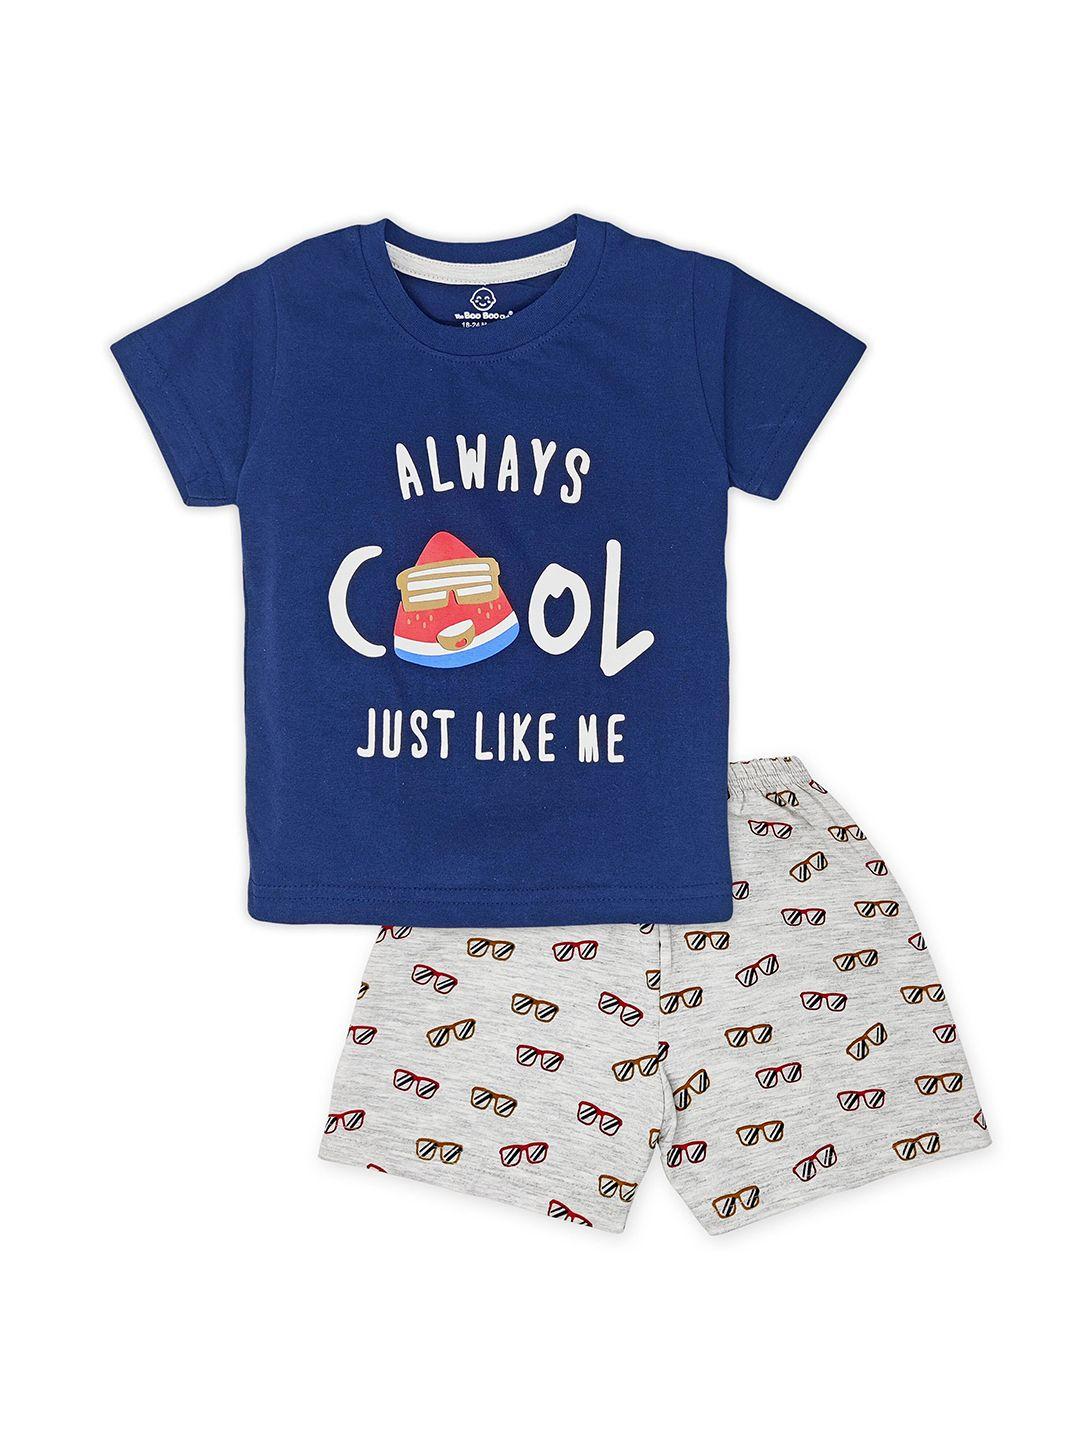 the boo club kids navy blue & white printed t-shirt with shorts